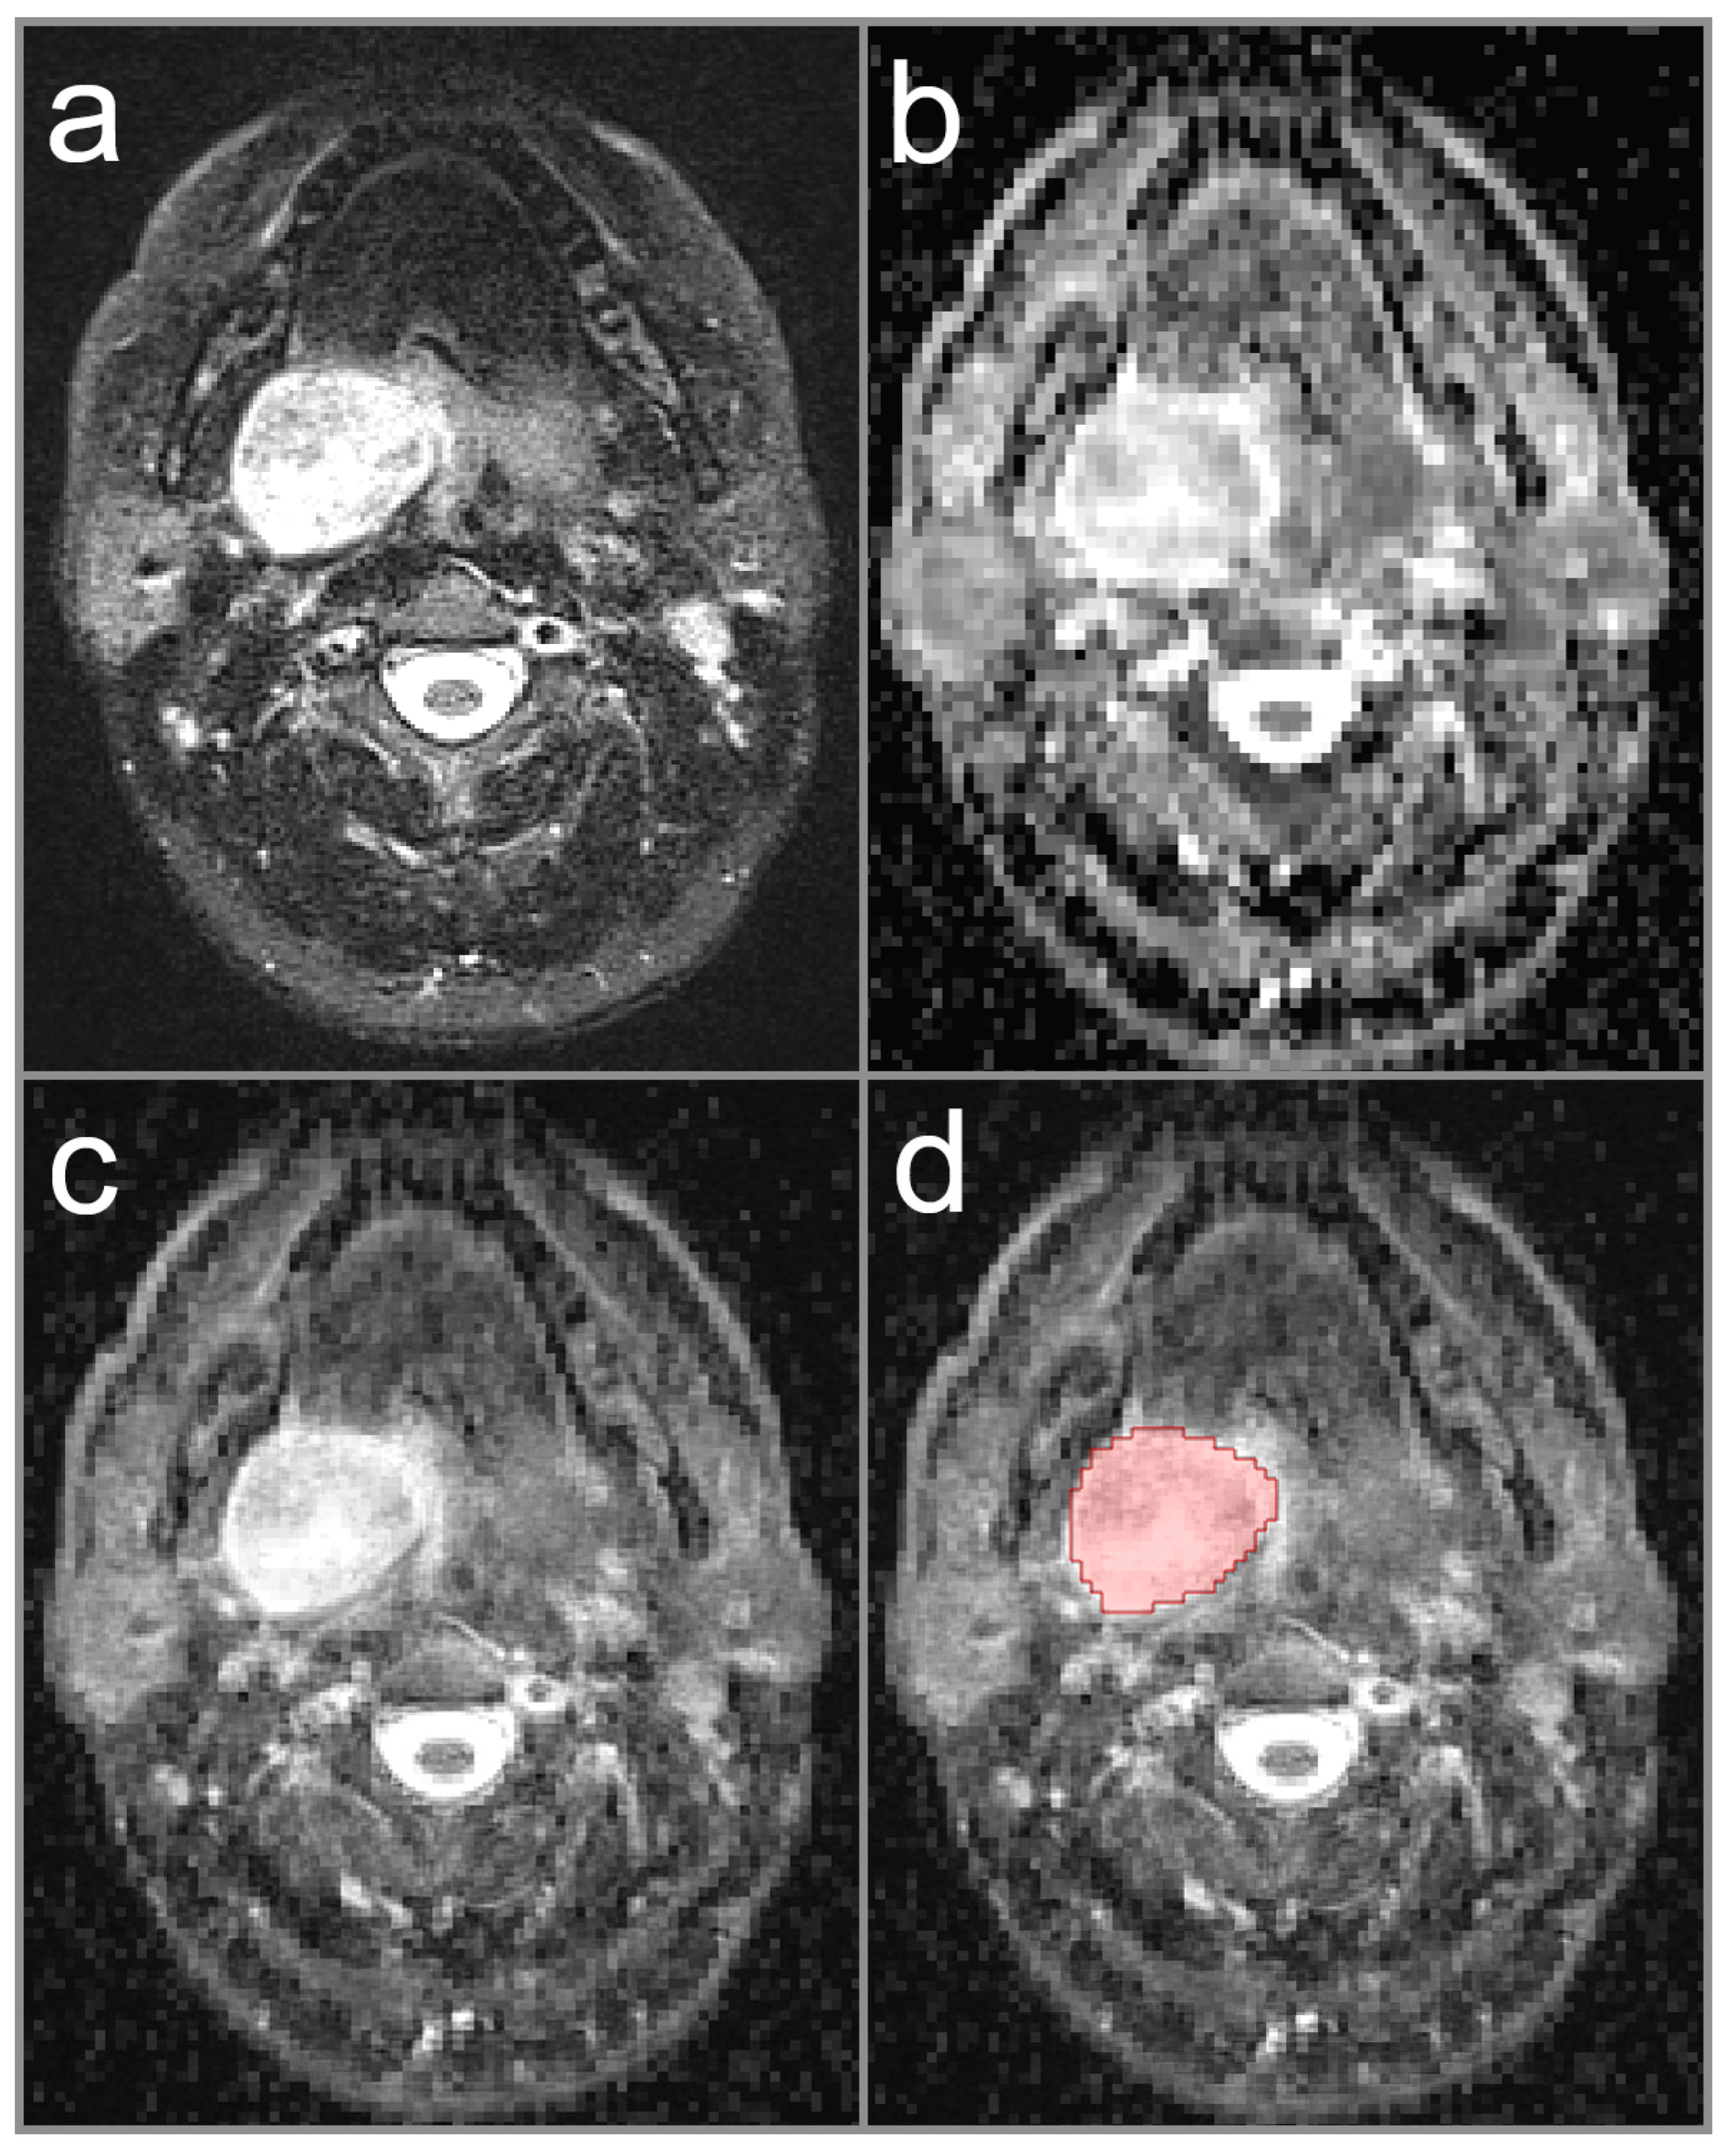 Diagnostics | Free Full-Text | Apparent Diffusion Coefficient (ADC)  Histogram Analysis in Parotid Gland Tumors: Evaluating a Novel Approach for  Differentiation between Benign and Malignant Parotid Lesions Based on Full  Histogram Distributions